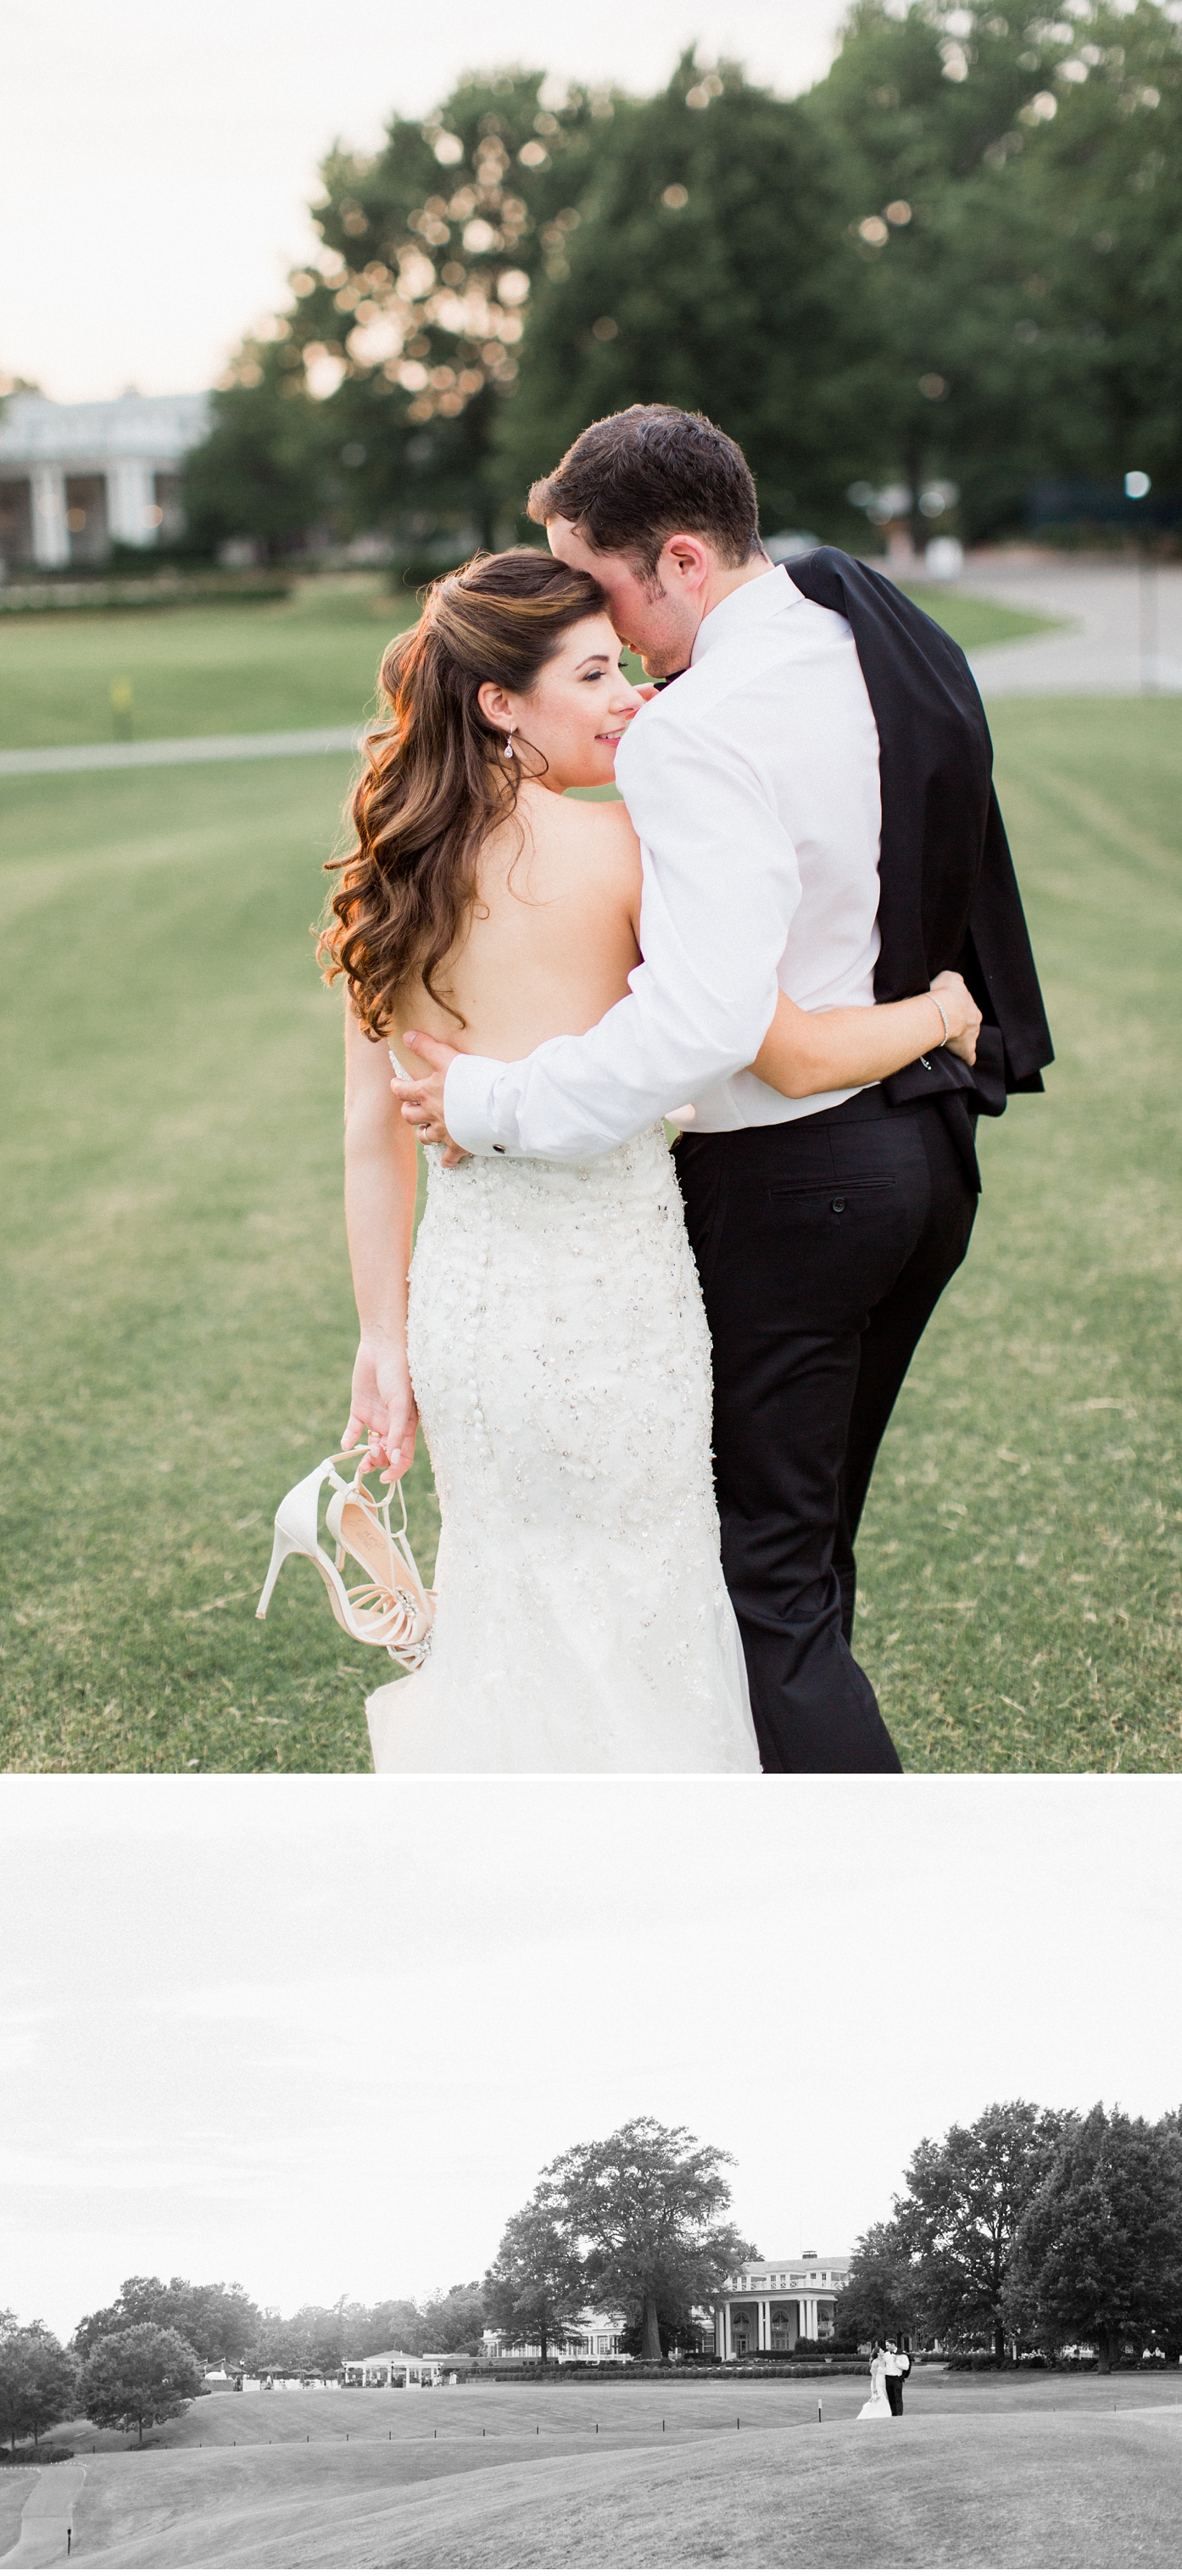 Golden Light Bride and Groom Portraits at Country Club of Virginia by Alisandra Photography